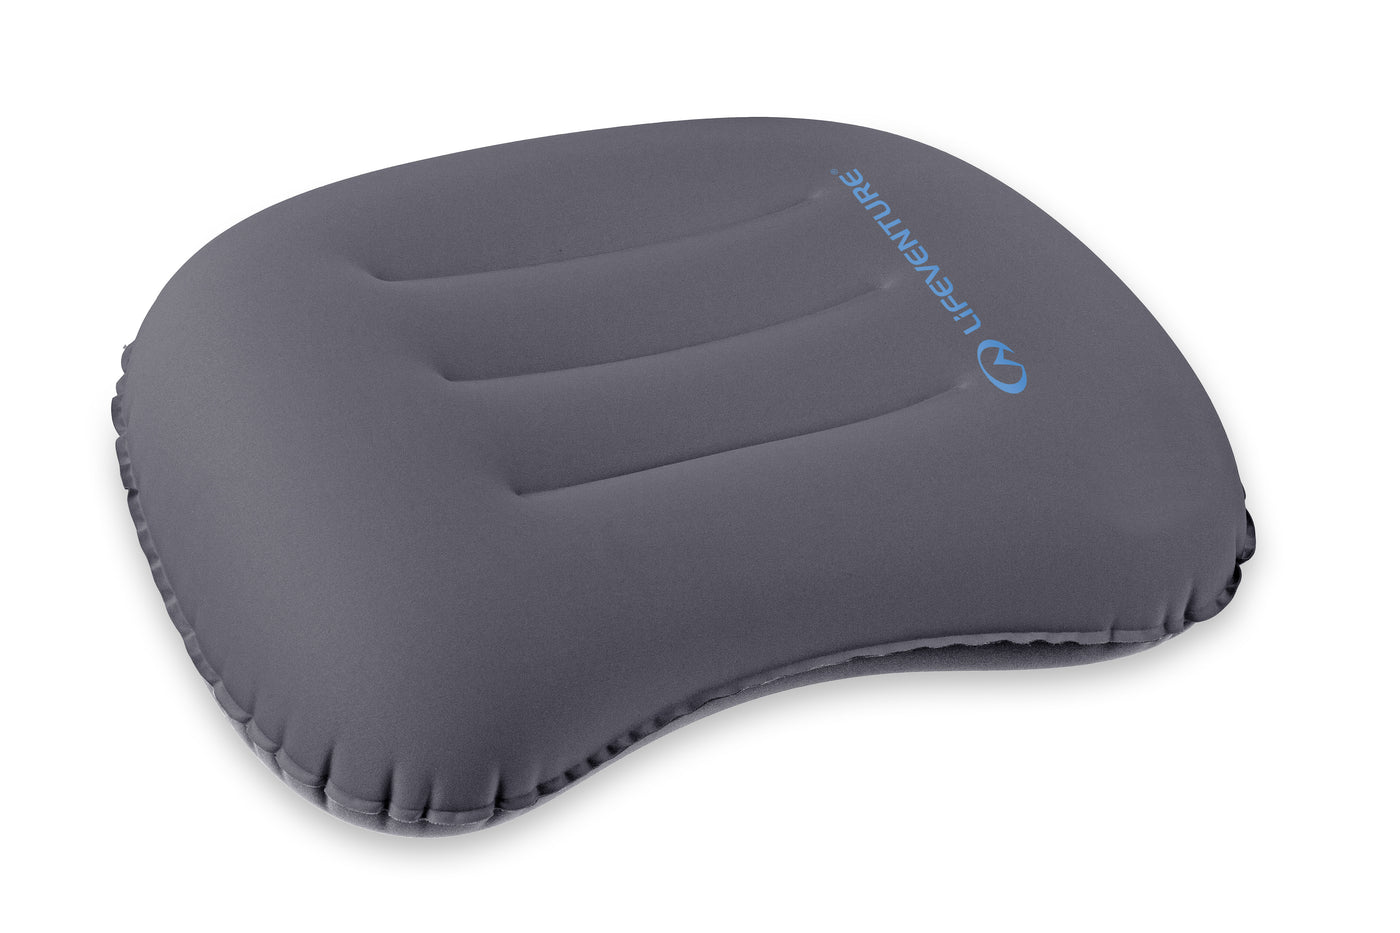 Lifeventure Inflatable Pillow Cushion | Travel Pillows and Accessories